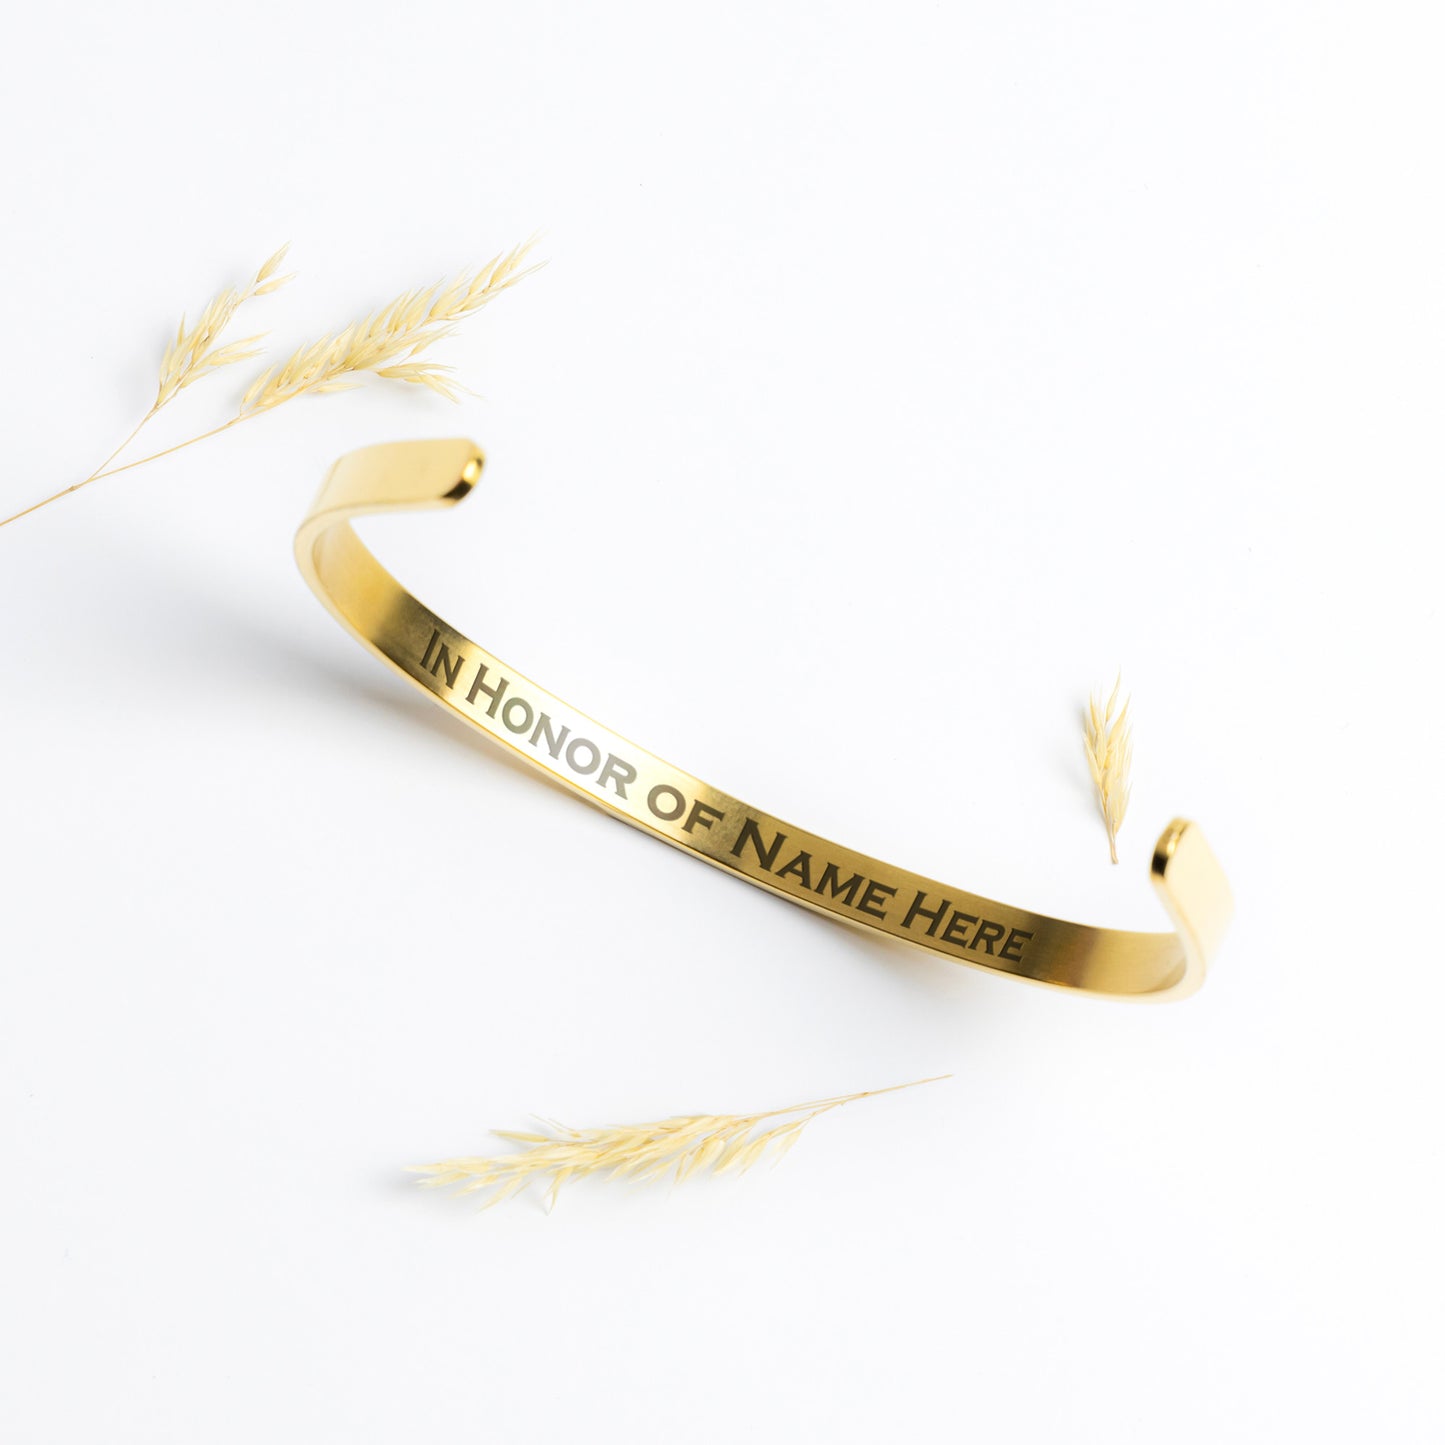 Personalized Cancer Awareness Cuff Bracelet